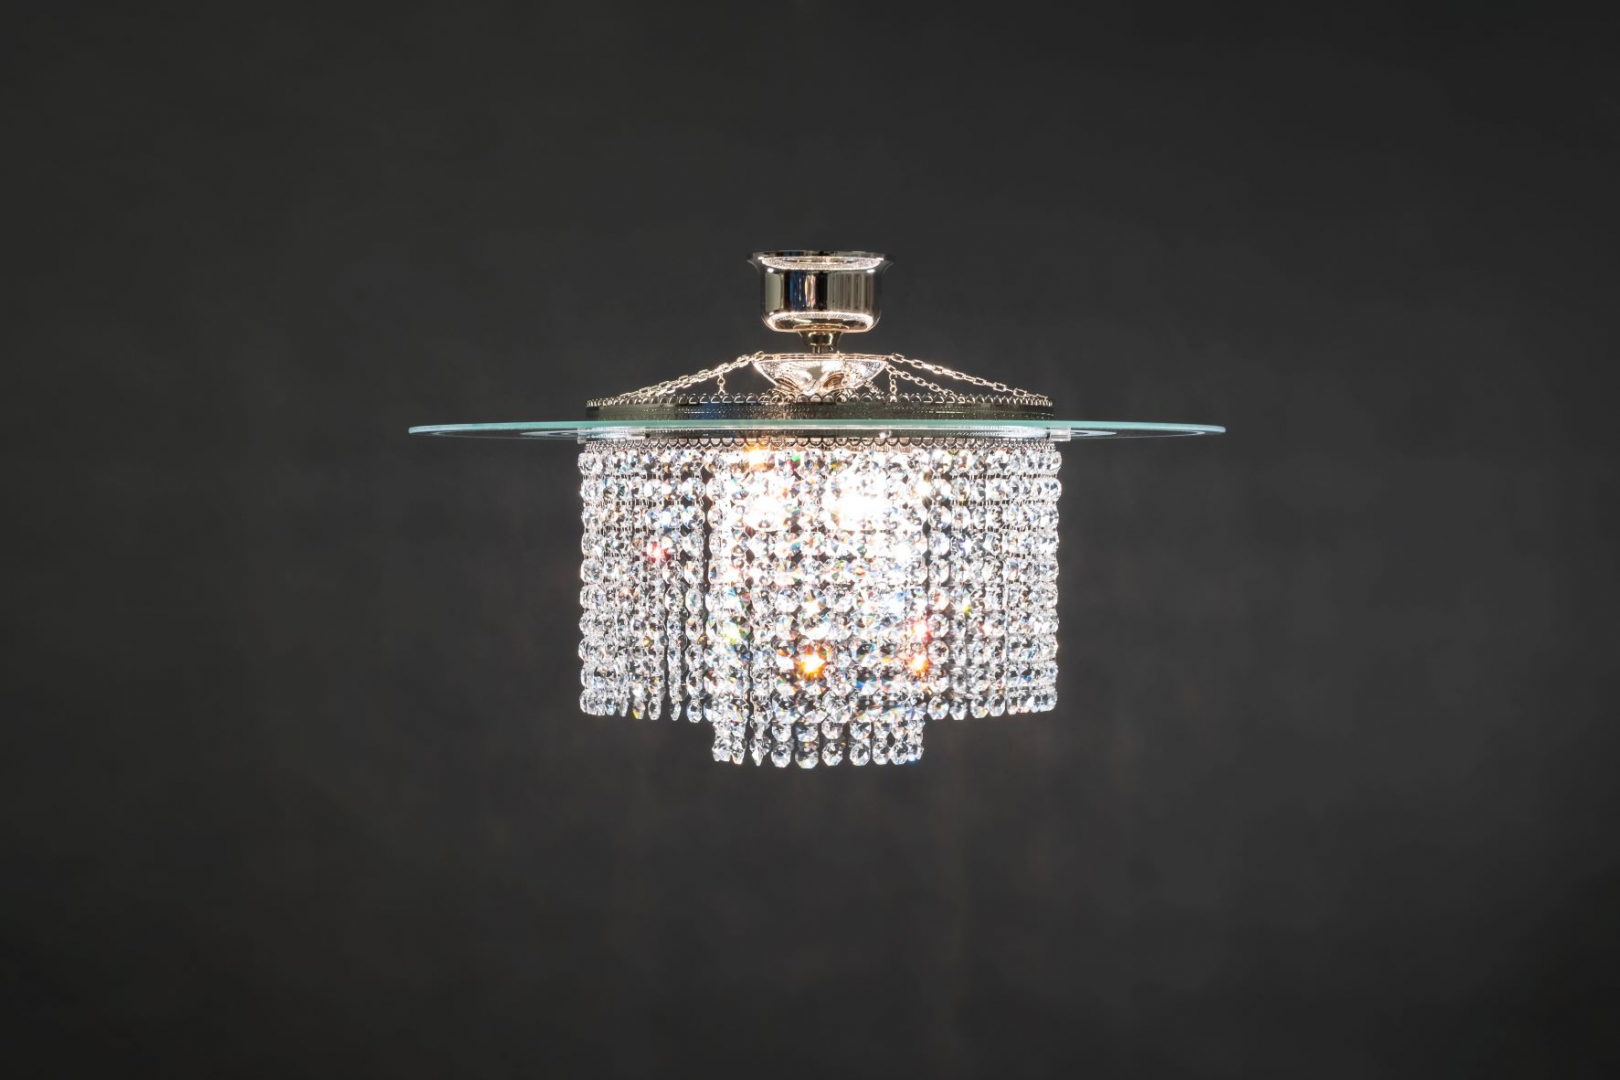 The modern and authentic crystal lamp Mirror 3. This trendy chandelier with a modern twist catches the eye.